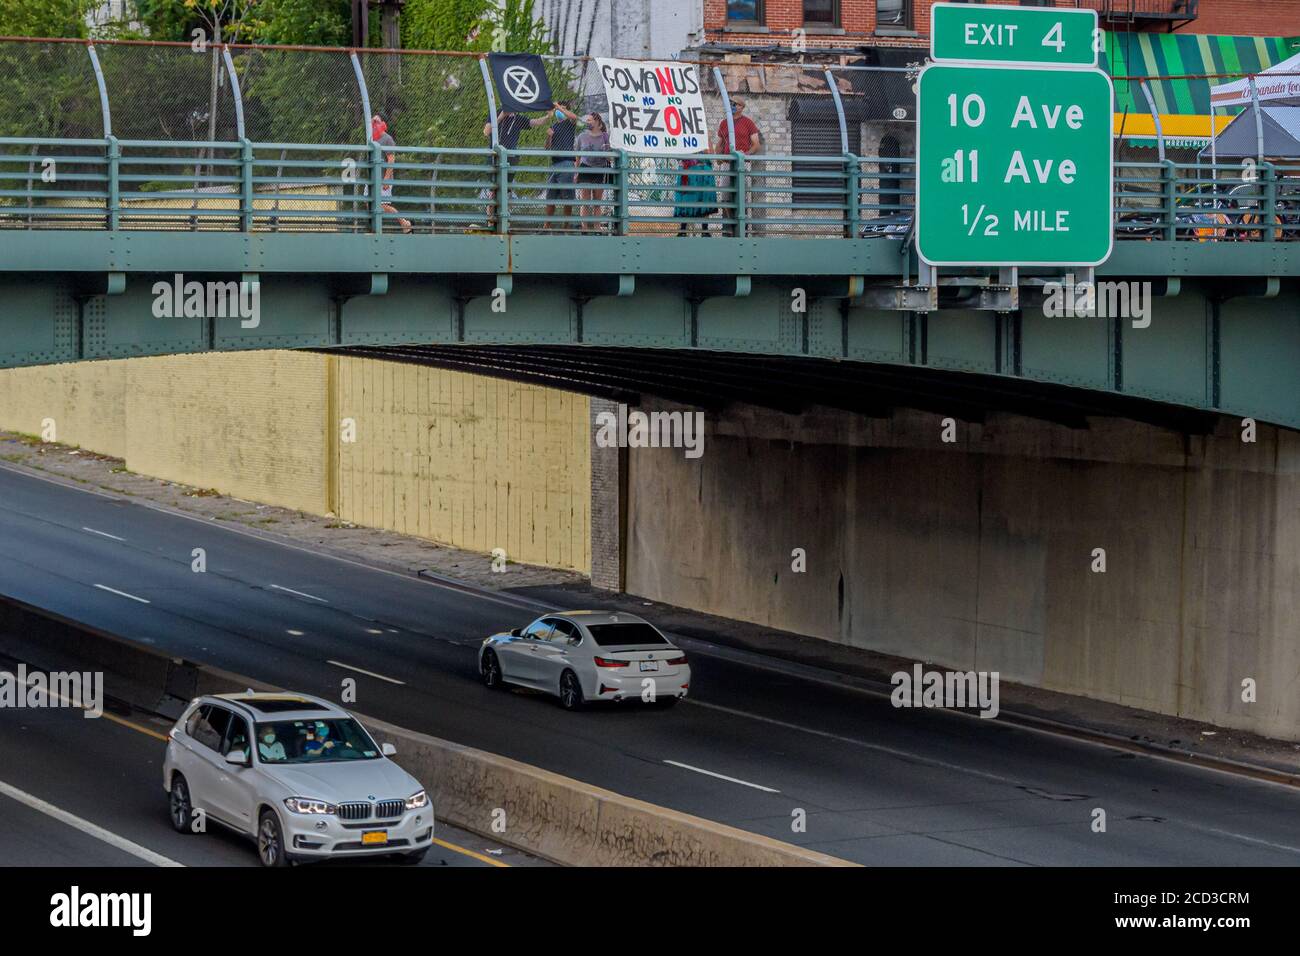 USA. 18th Aug, 2020. Protesters holding a No Gowanus Rezoning banner at the overpass. Gowanus residents organized a banner drop during rush hour at an overpass over the Prospect expressway in Brooklyn on August 18, 2020 to call on elected officials to oppose the proposed Gowanus rezoning. (Photo by Erik McGregor/Sipa USA) Credit: Sipa USA/Alamy Live News Stock Photo